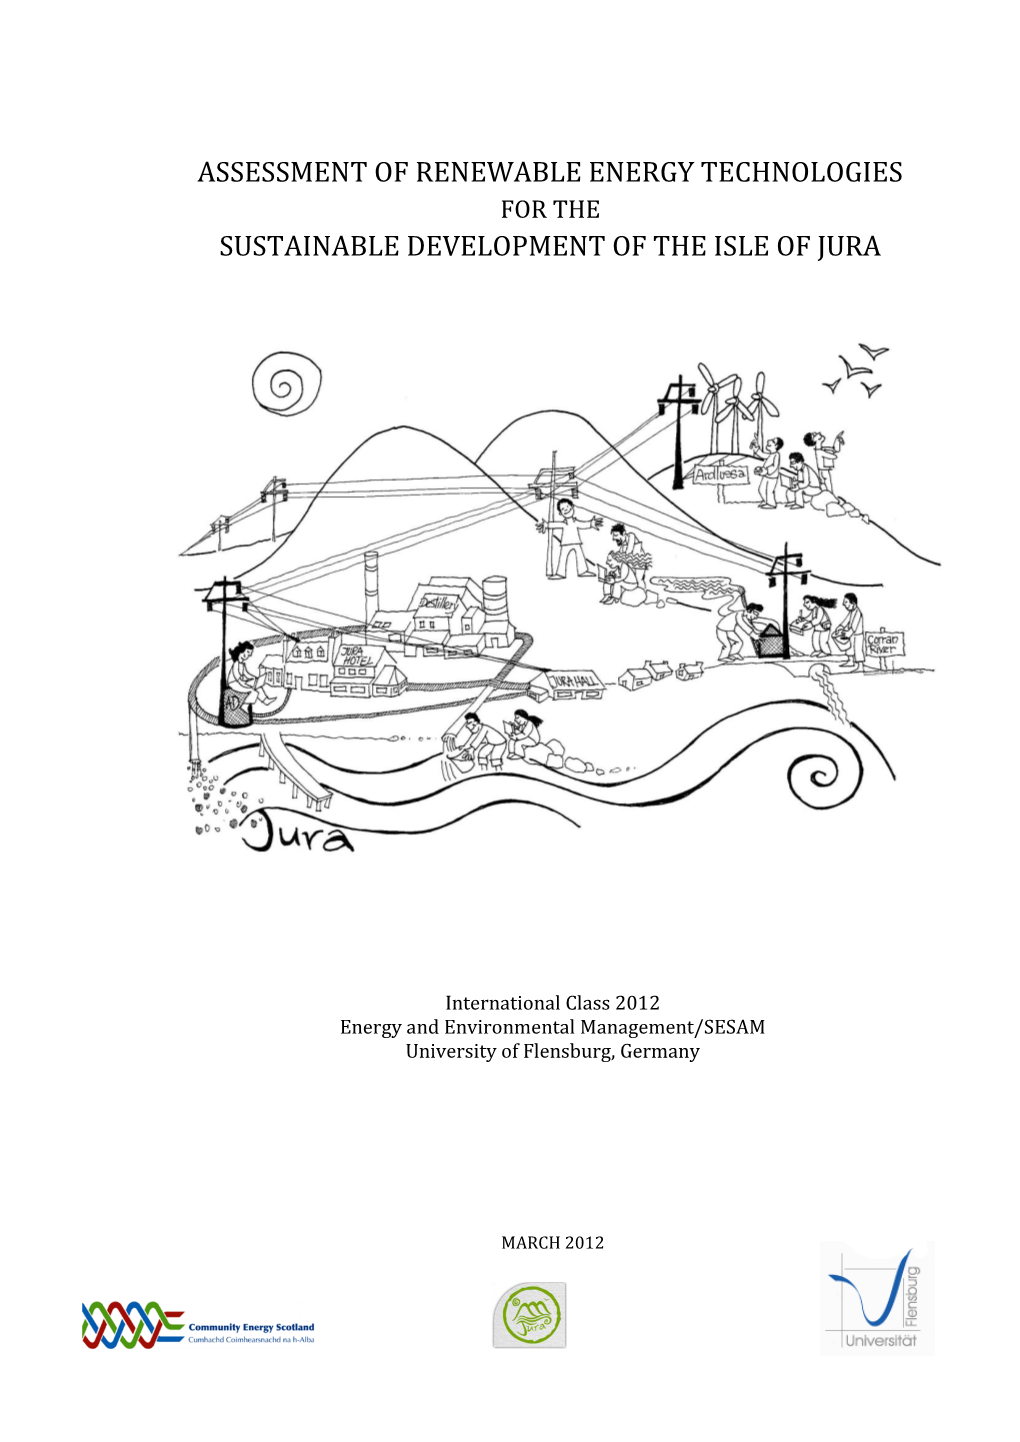 Assessment of Renewable Energy Technologies for the Sustainable Development of the Isle of Jura